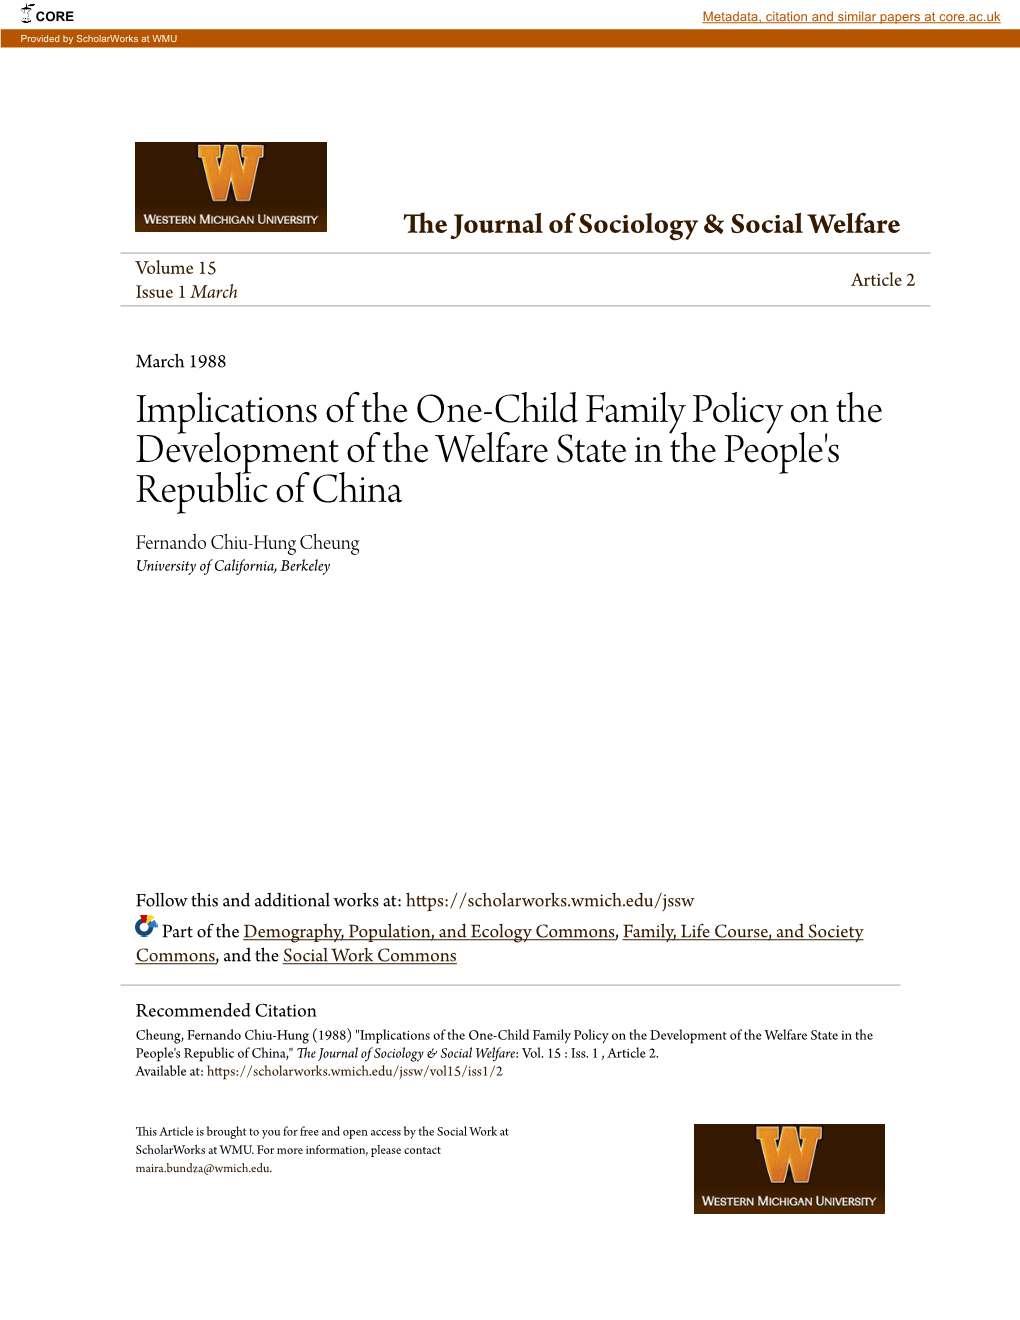 Implications of the One-Child Family Policy on the Development of The